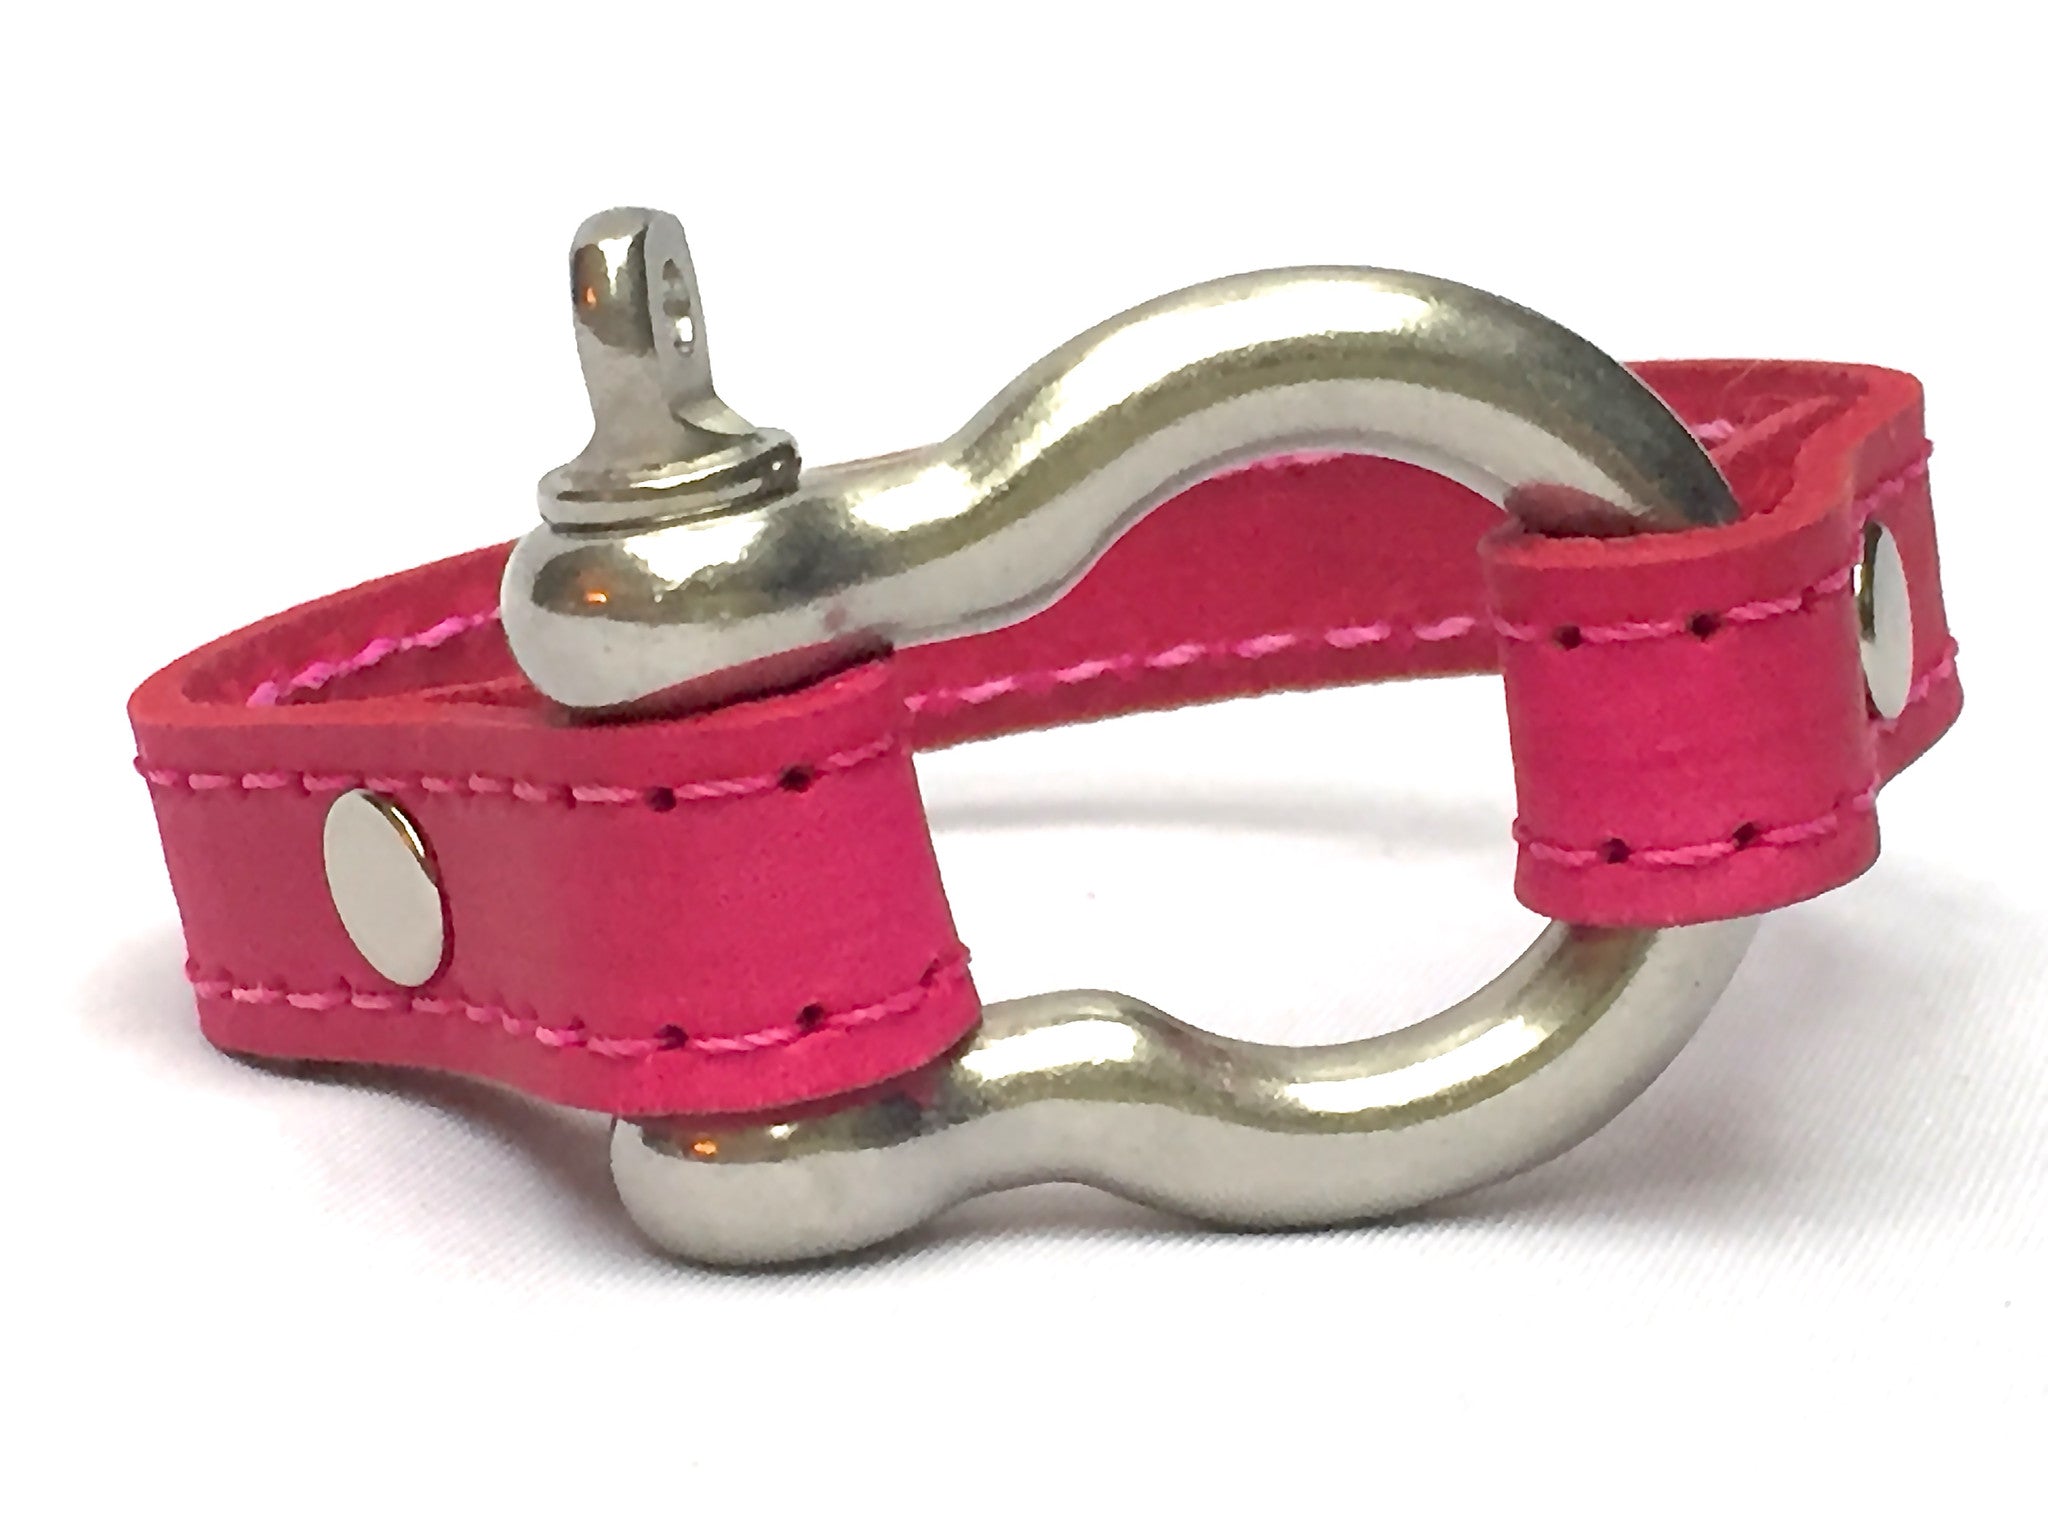 STITCHED LEATHER AND STAINLESS STEEL SHACKLE by nyet jewelry.